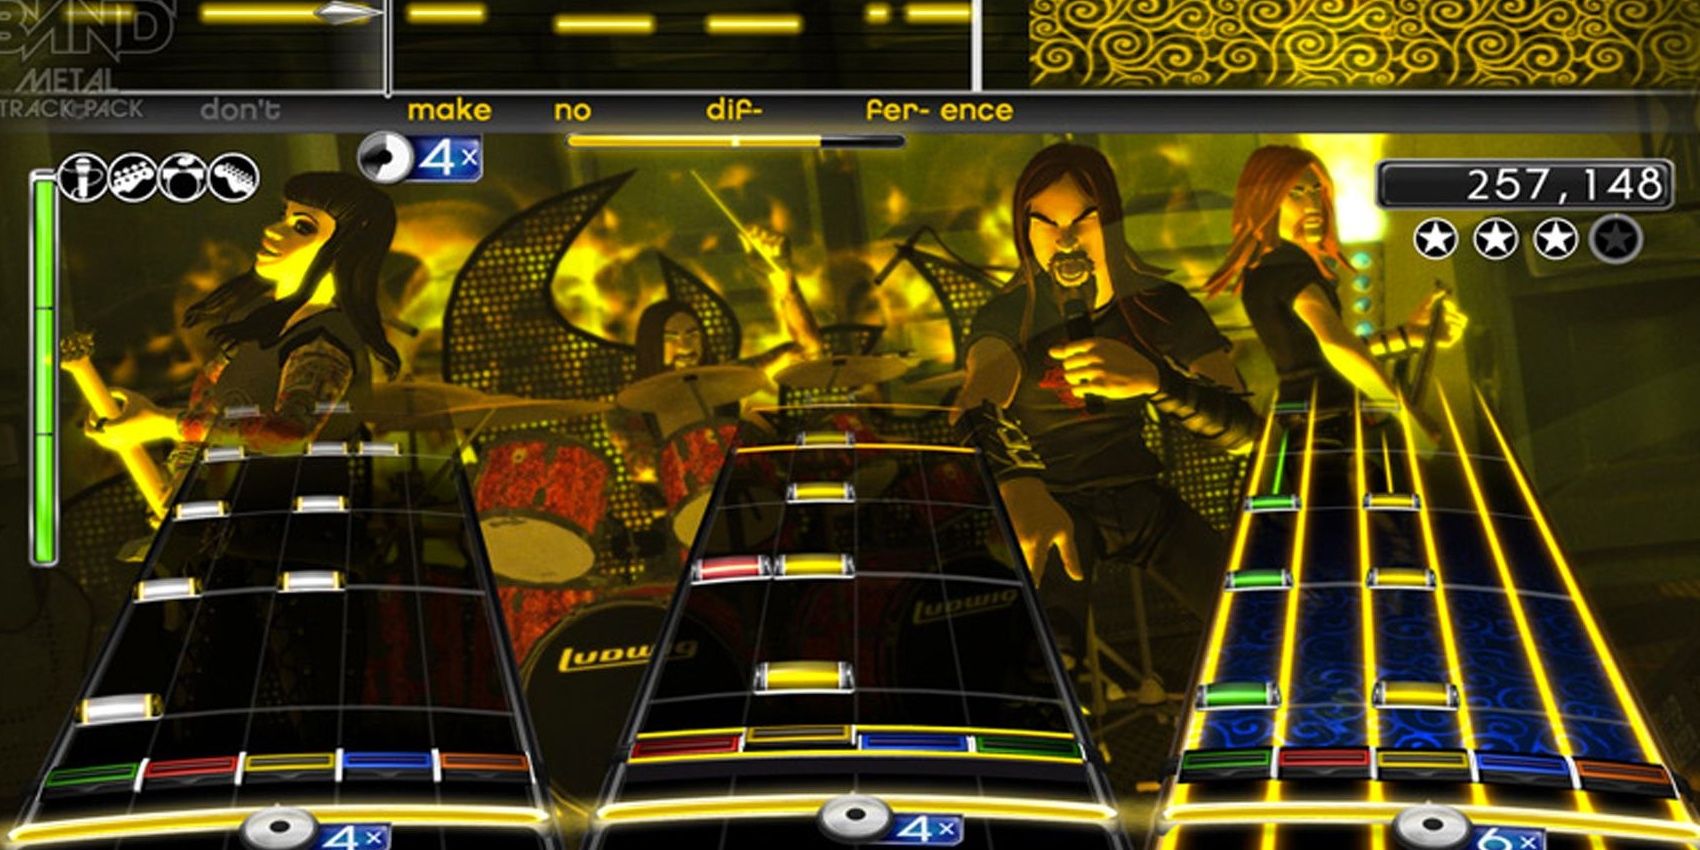 A promo screenshot of a three-way gameplay match in Rock Band 2